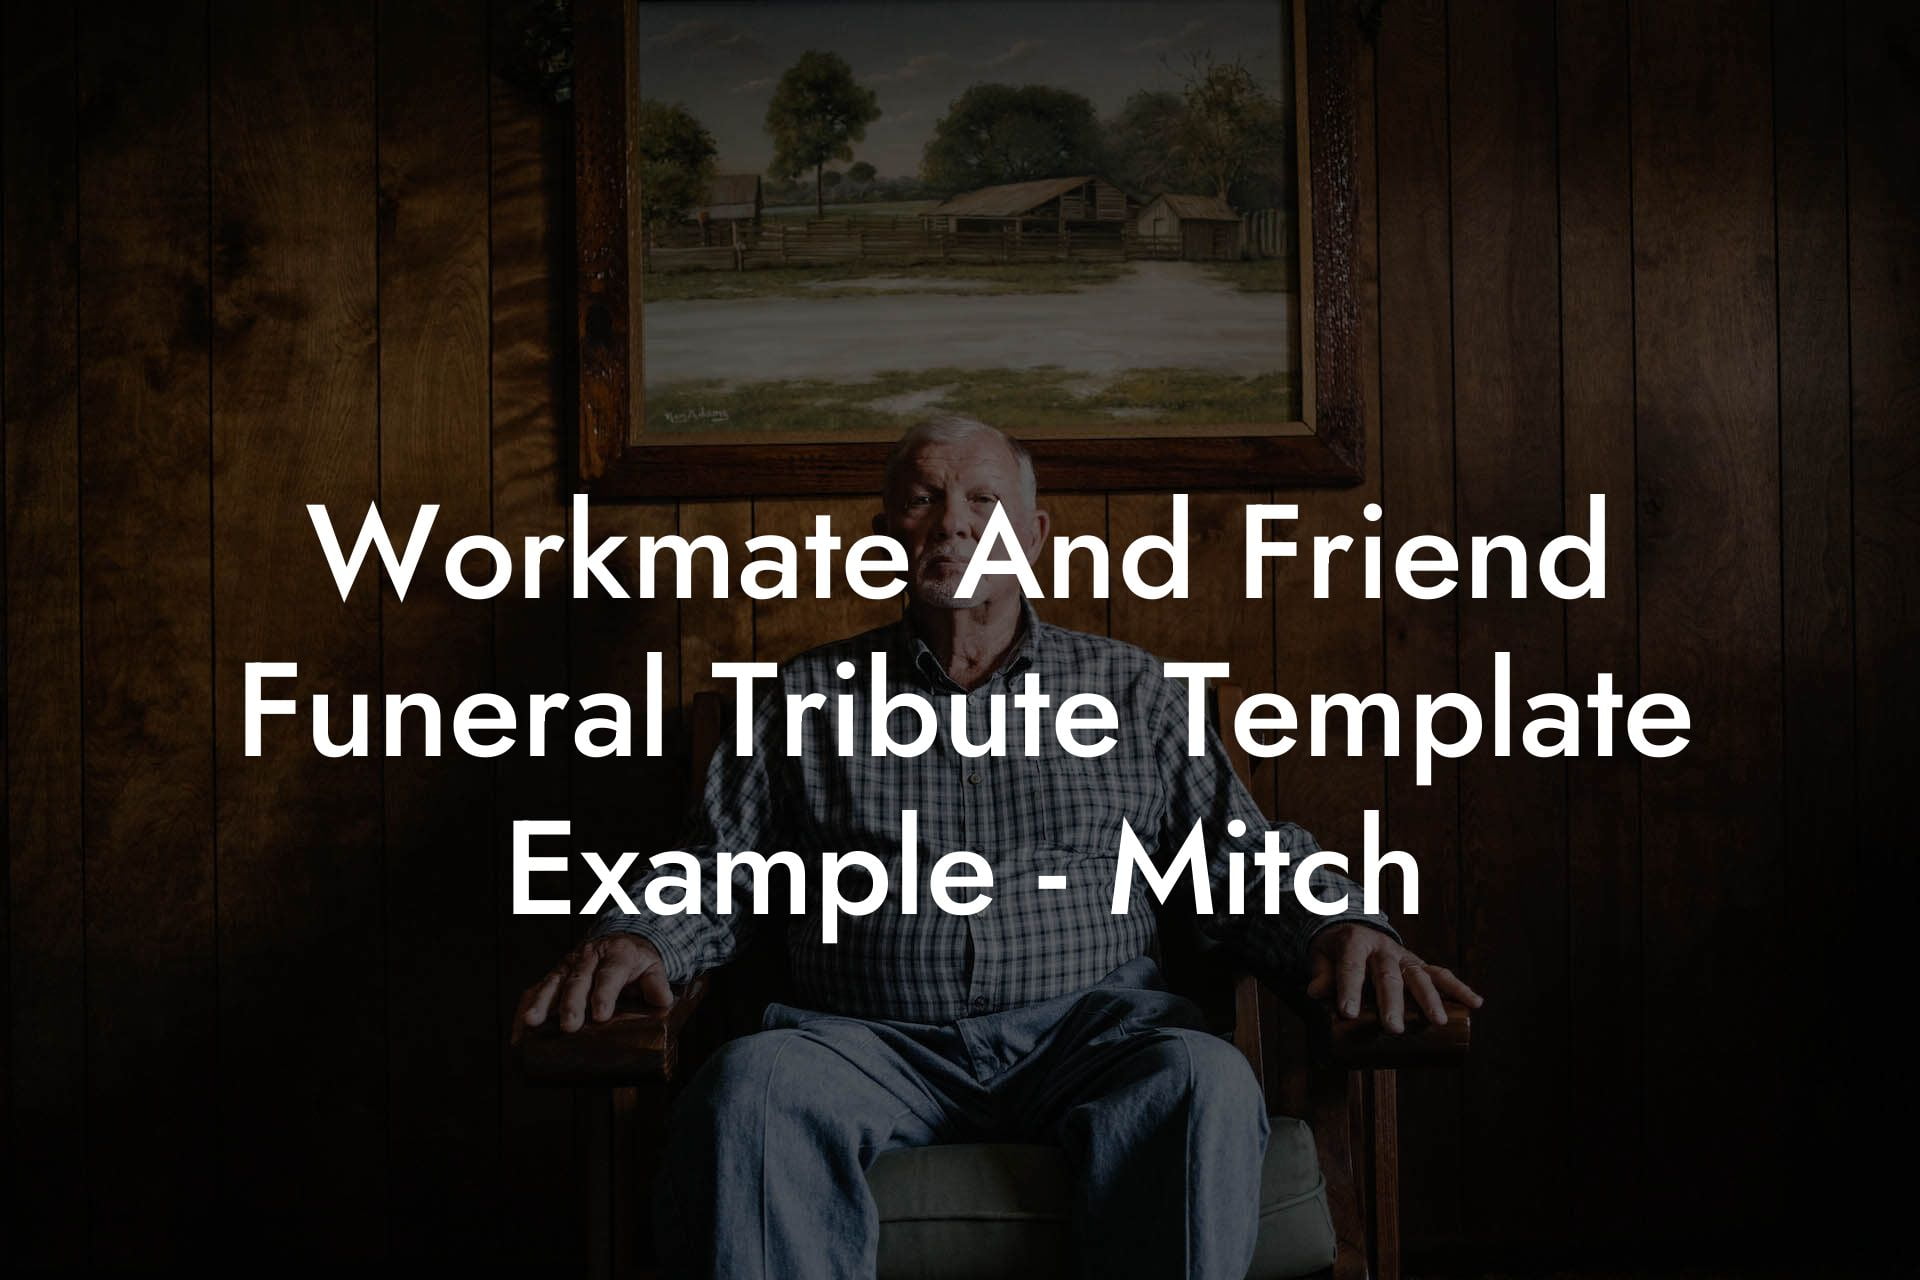 Workmate And Friend Funeral Tribute Template Example - Mitch